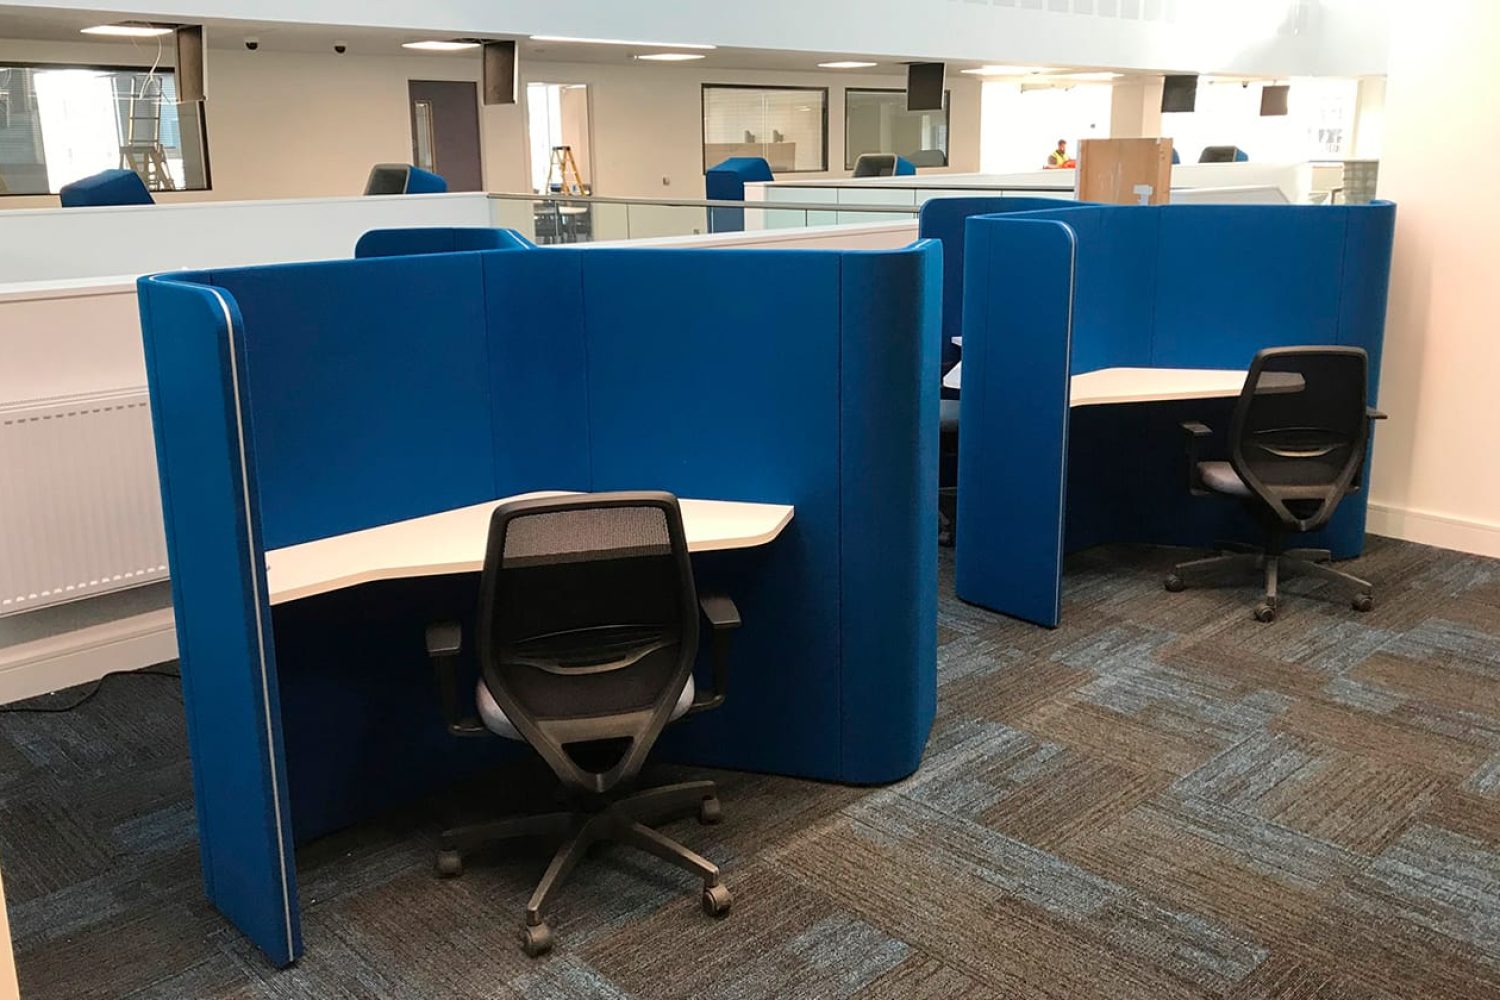 Two Ocee and Four Design blue cubicles in an office with desks and chairs at Coventry University